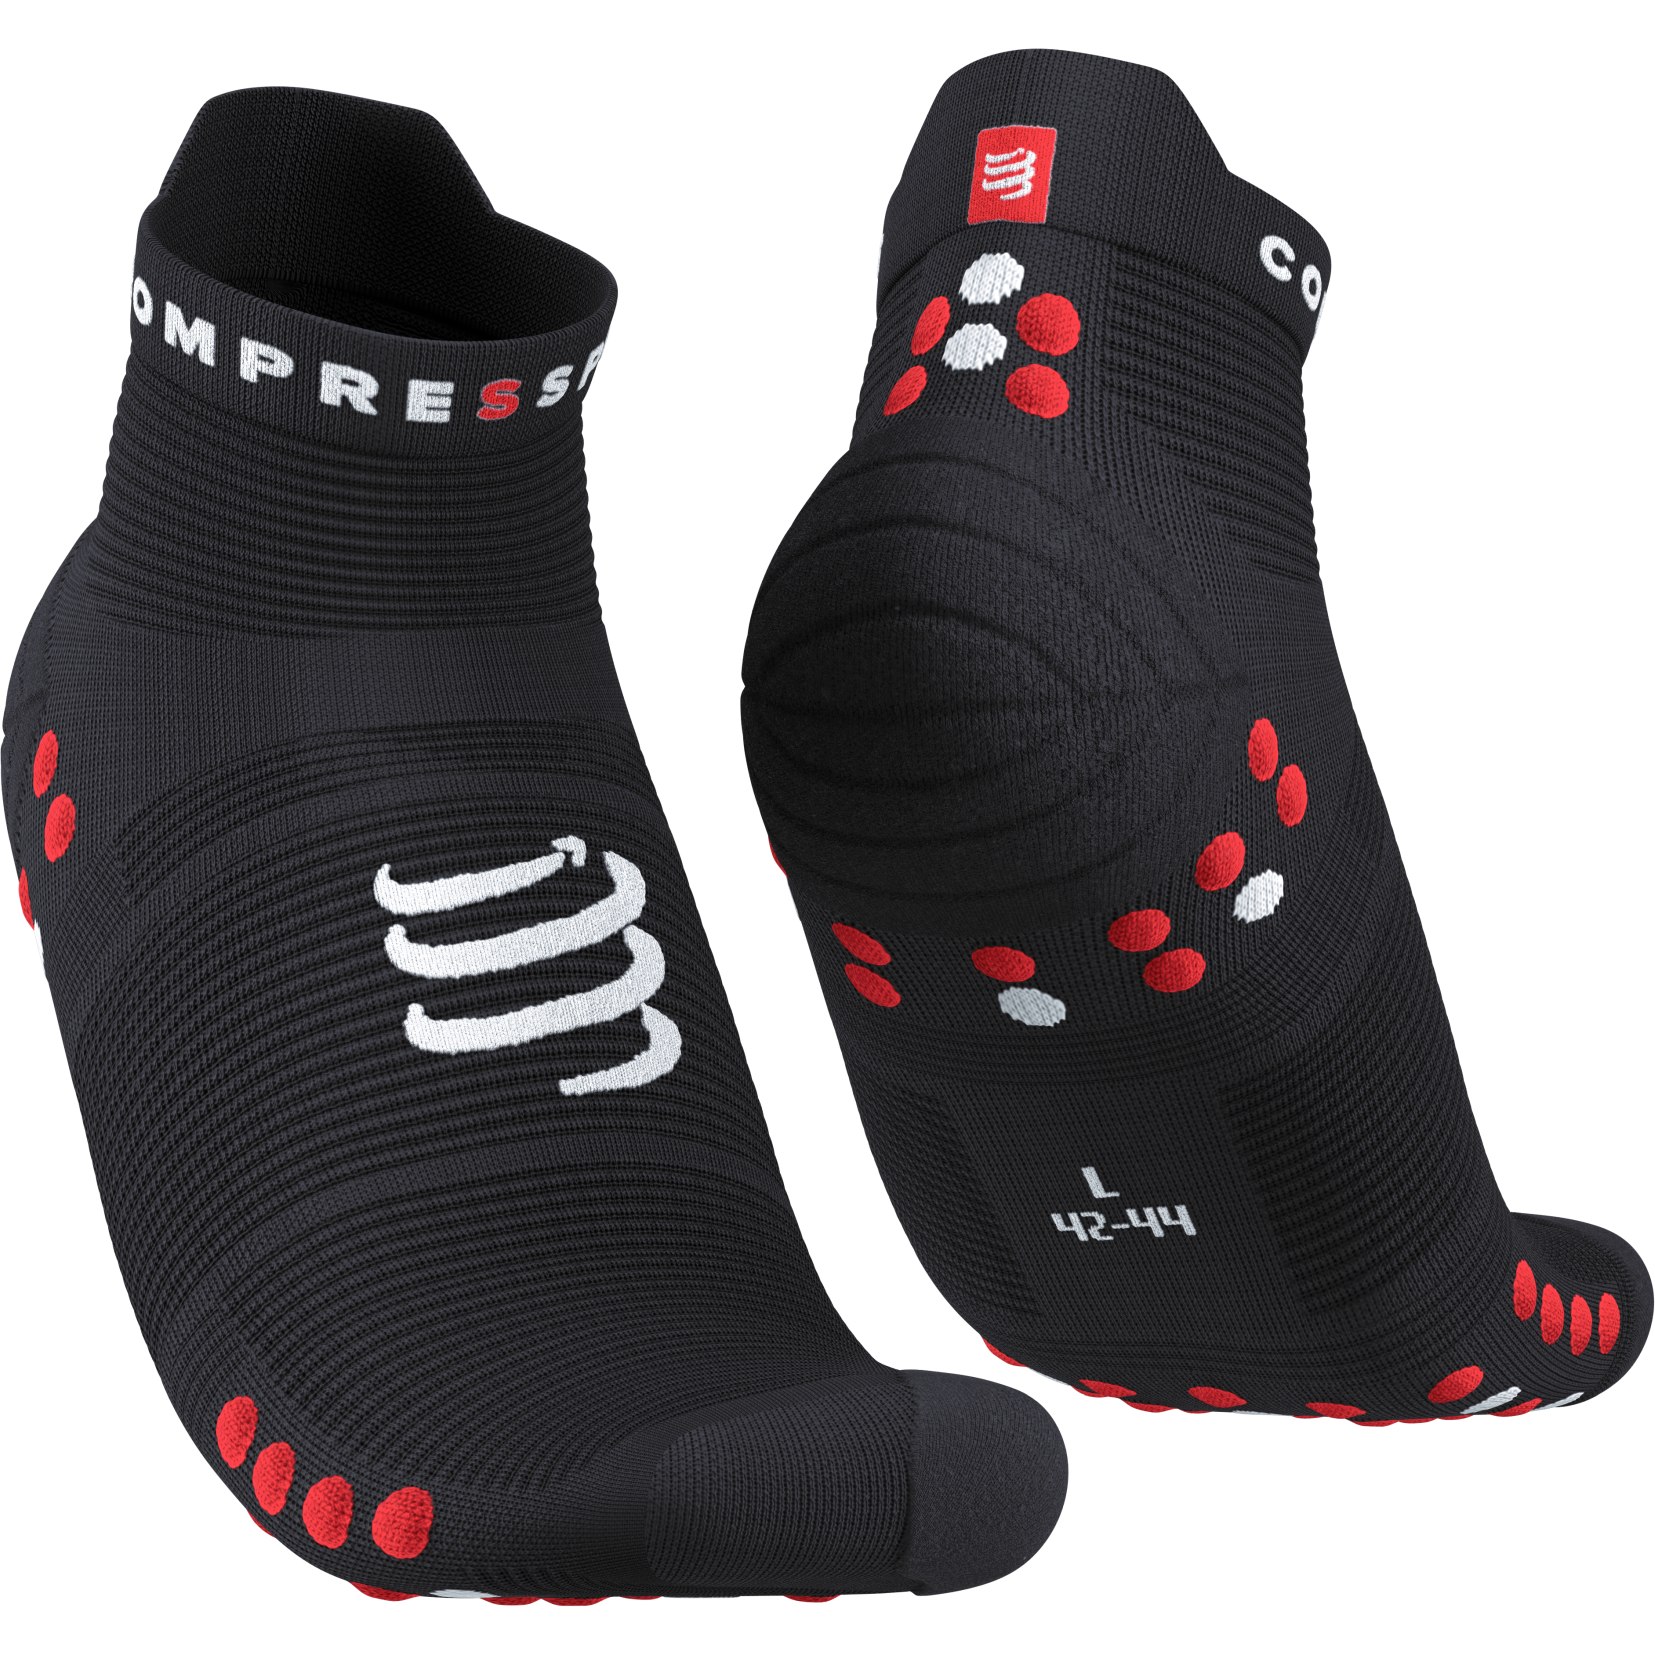 Picture of Compressport Pro Racing Compression Socks v4.0 Run Low - black/red